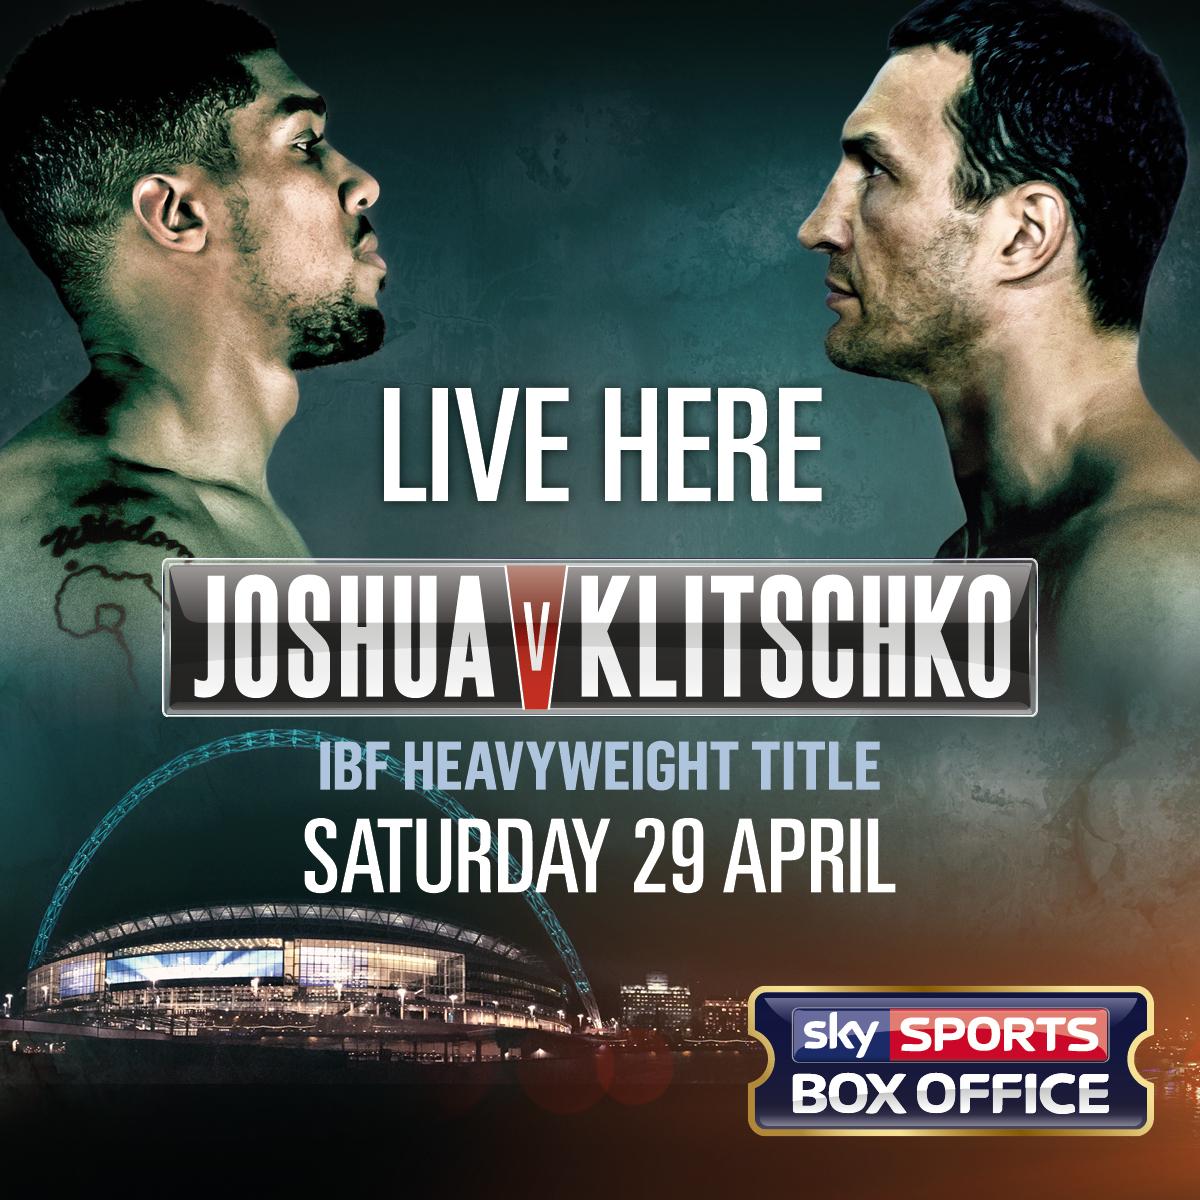 In less than 24 hours, one of the most exciting heavyweight boxing fight will occur, Joshua vs Klitschko